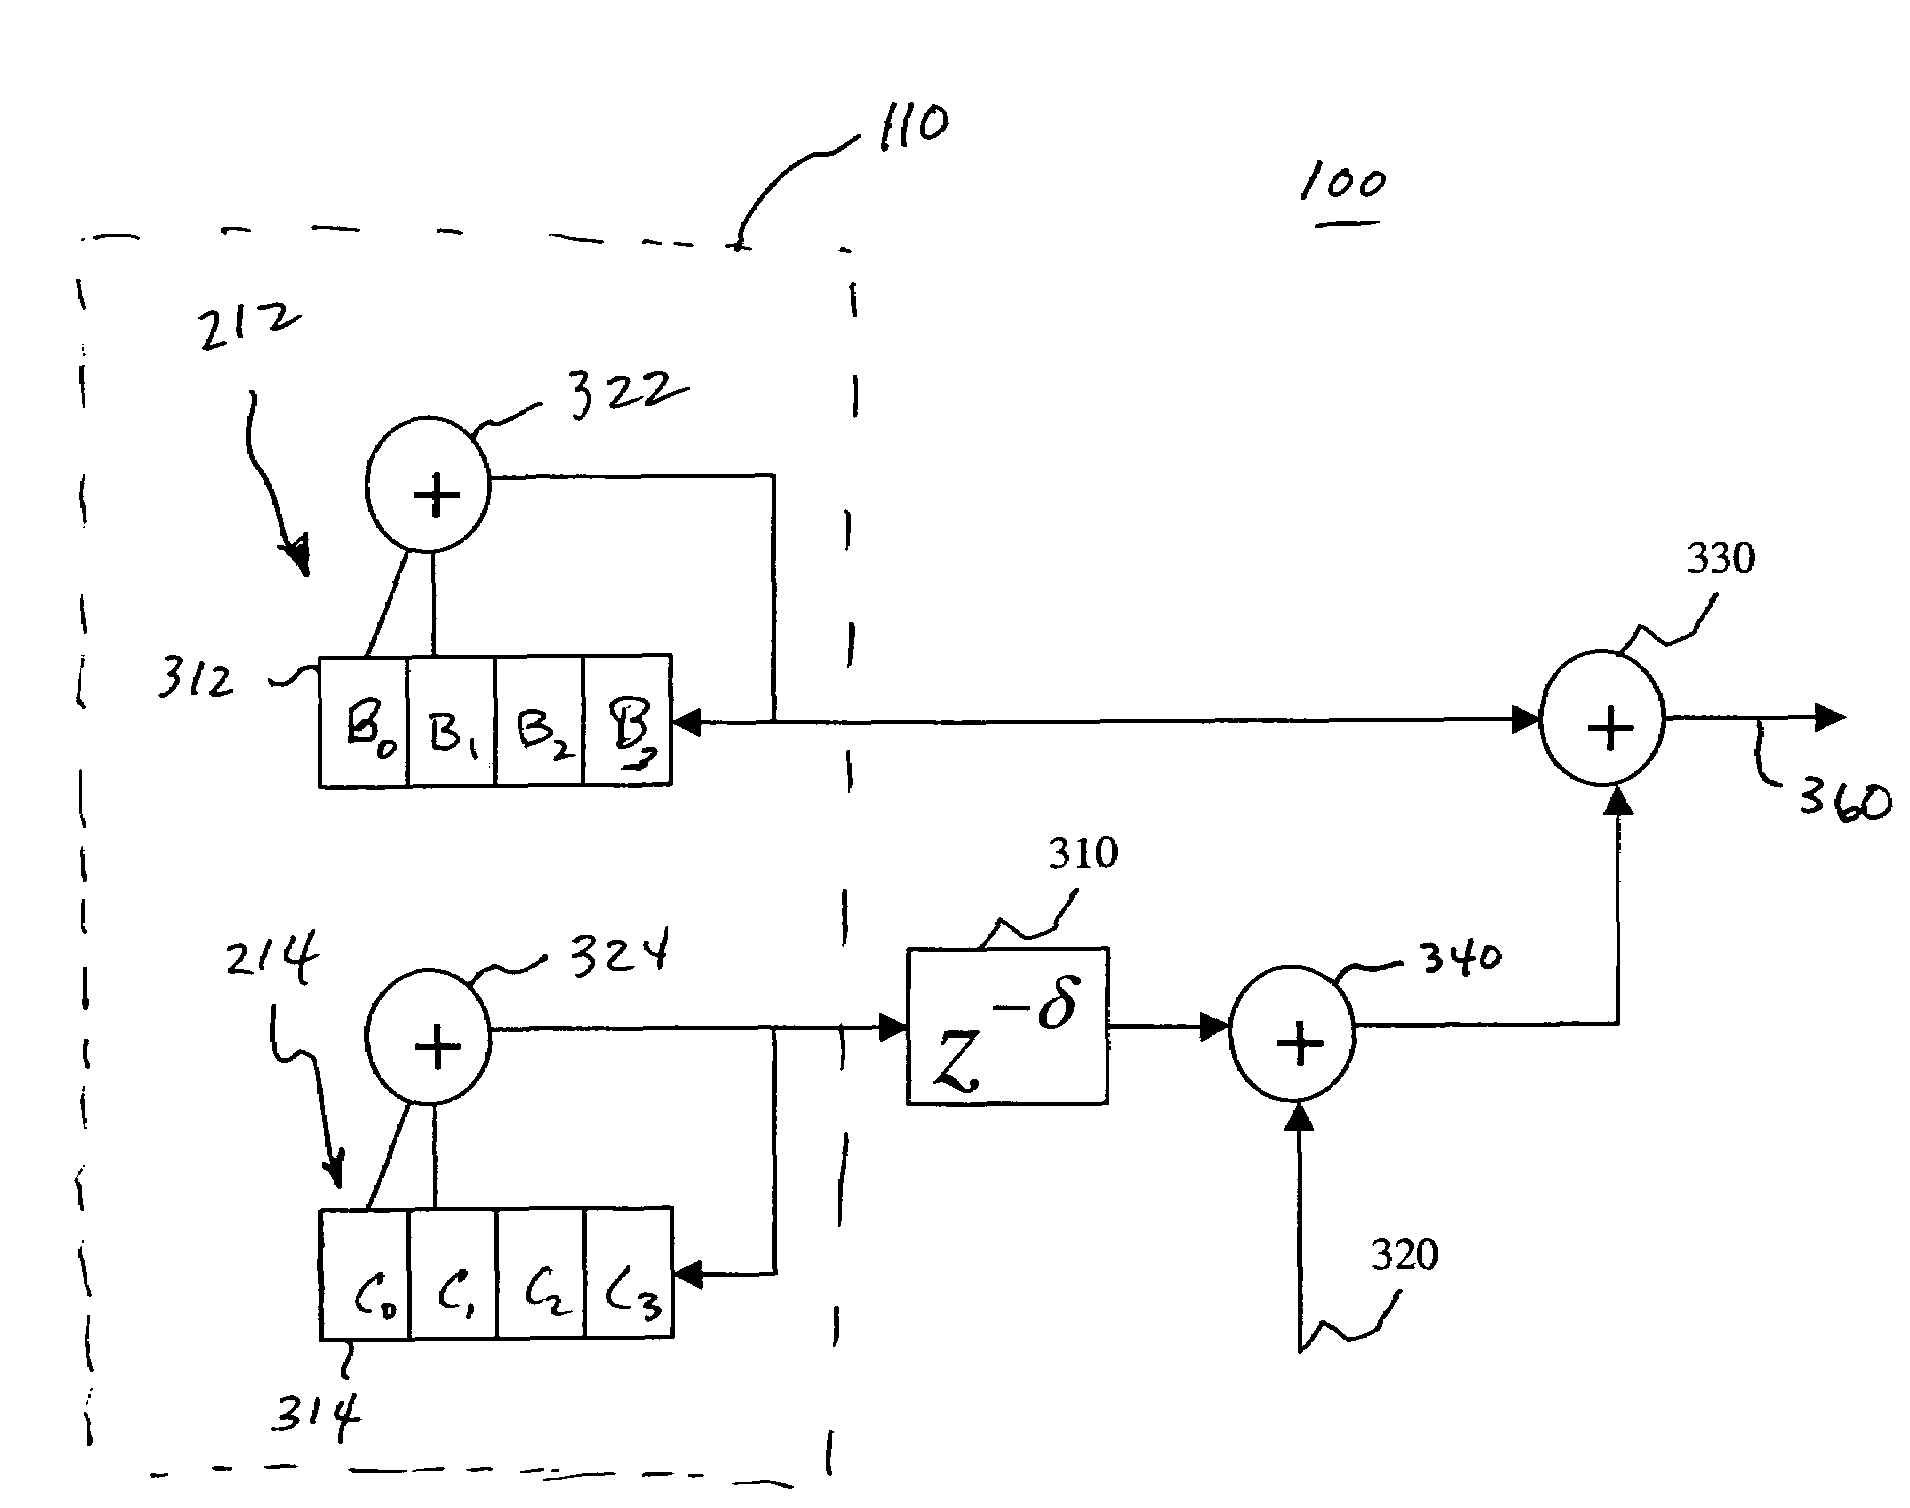 Time-delayed transmitted reference spread spectrum transmitter with digital noise generator